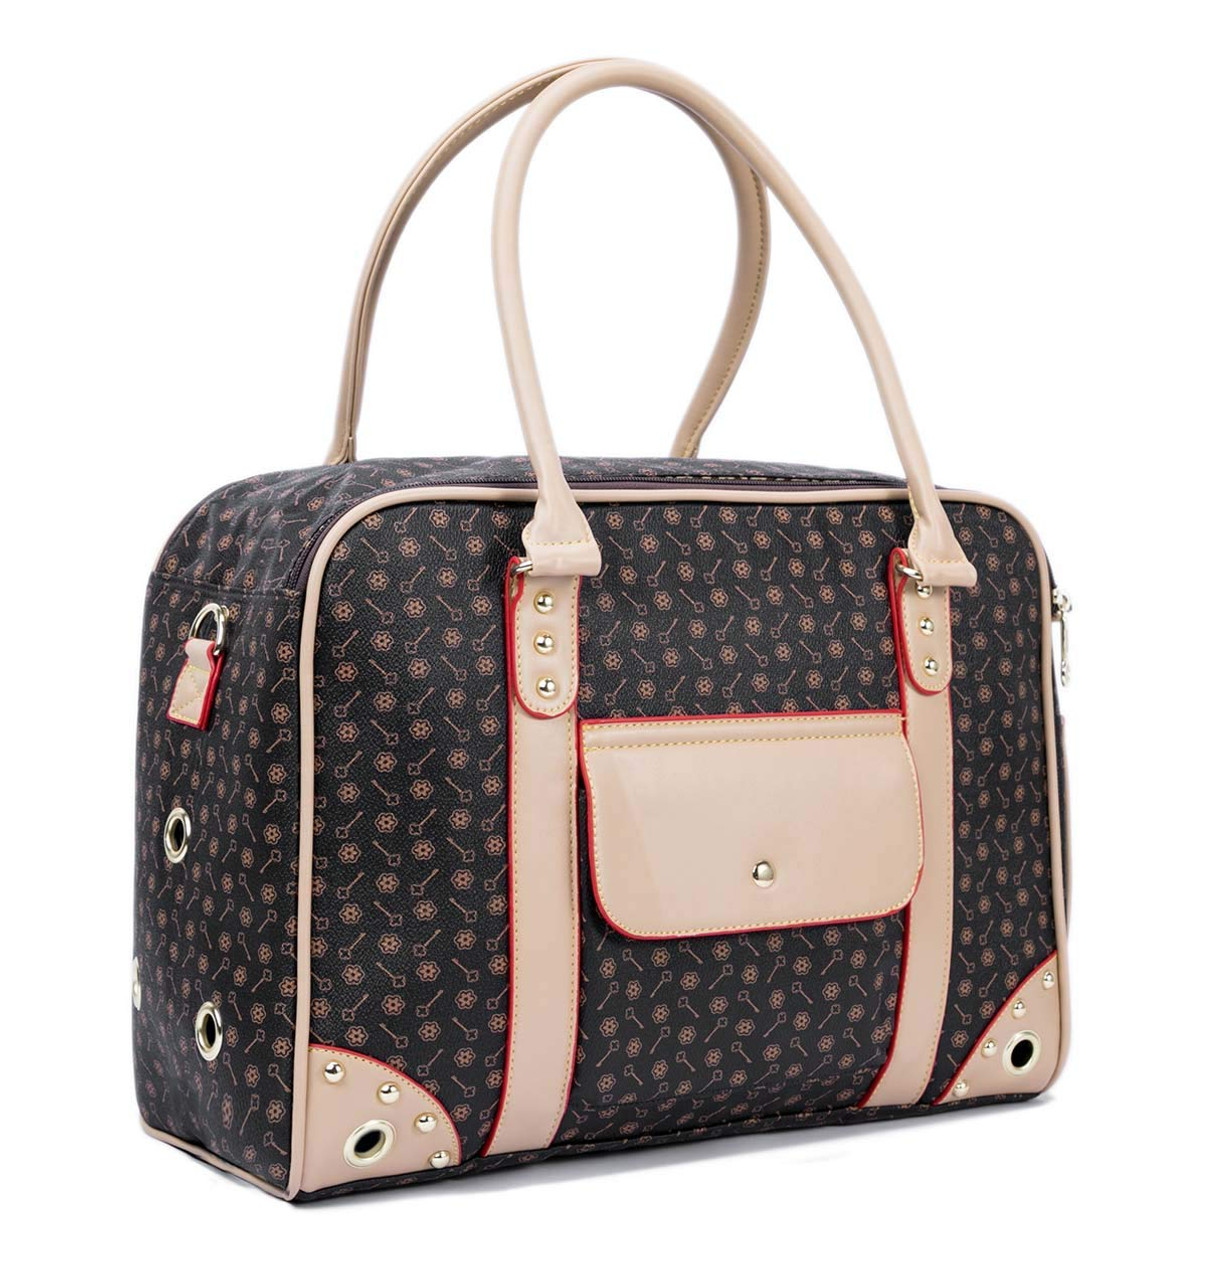 dog carrier tote